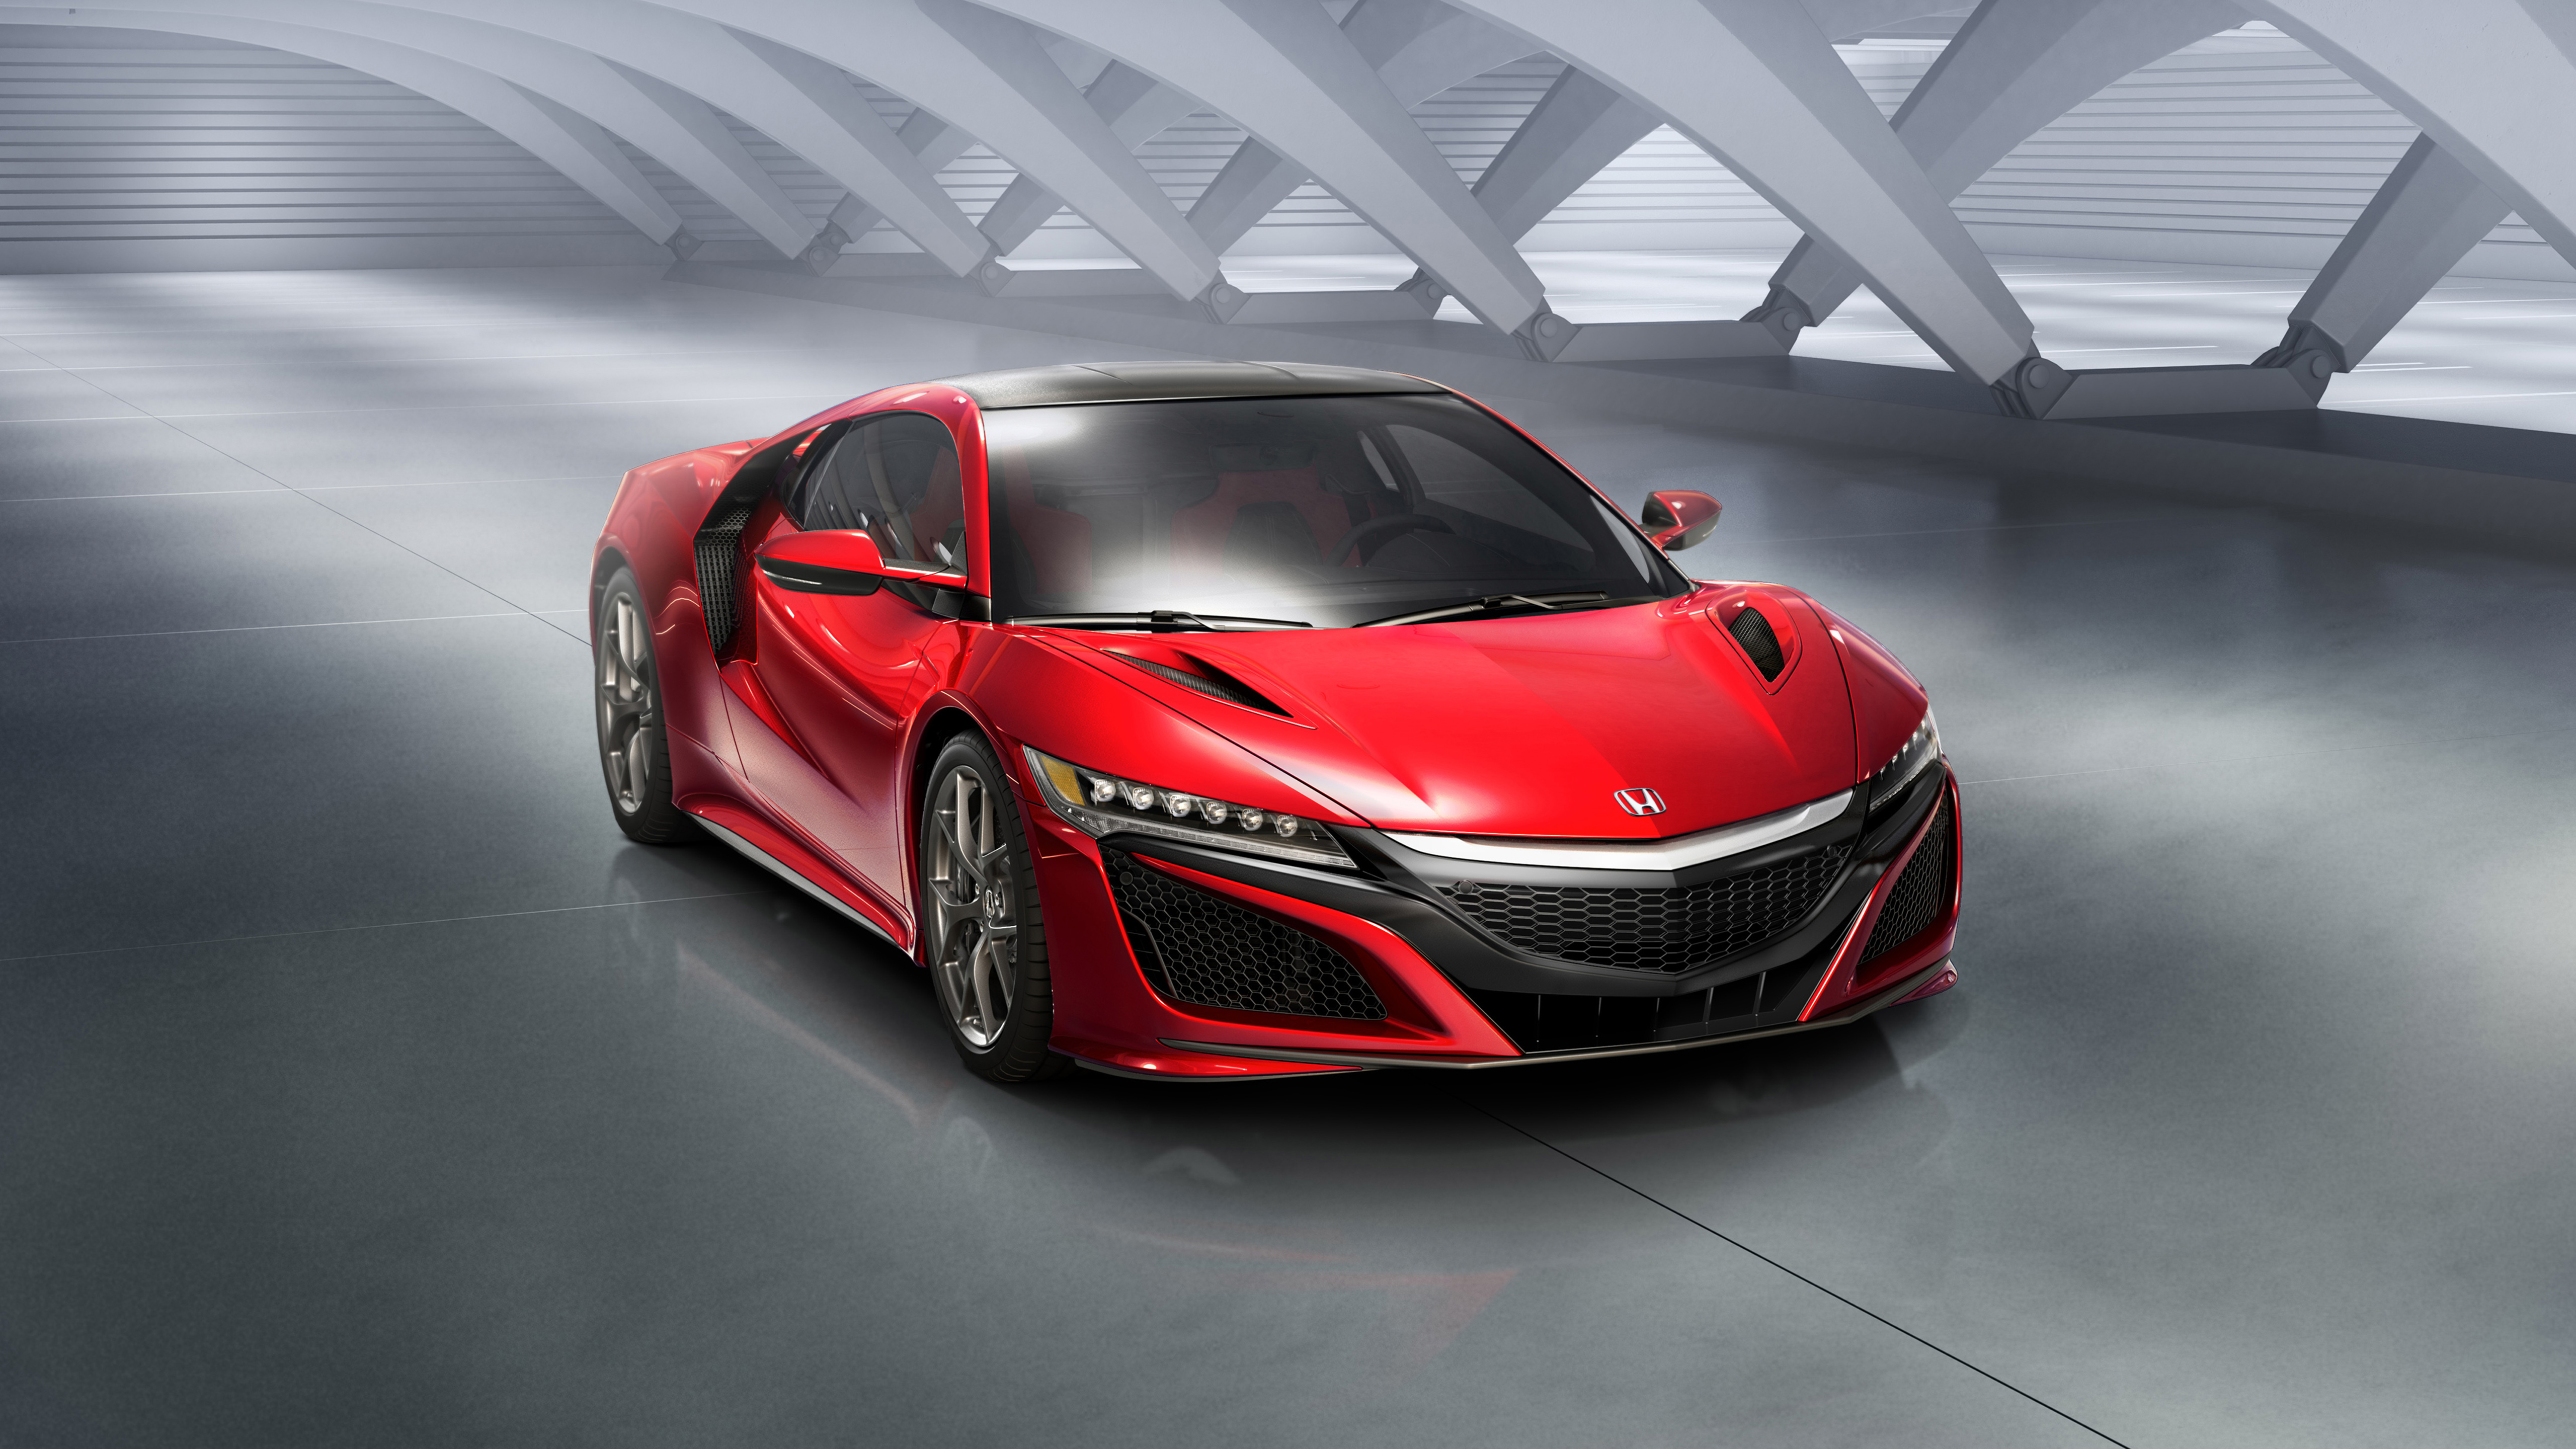 Honda Nsx Wallpaper Hd Cars 4k Wallpapers Images Photos And Background Wallpapers Den